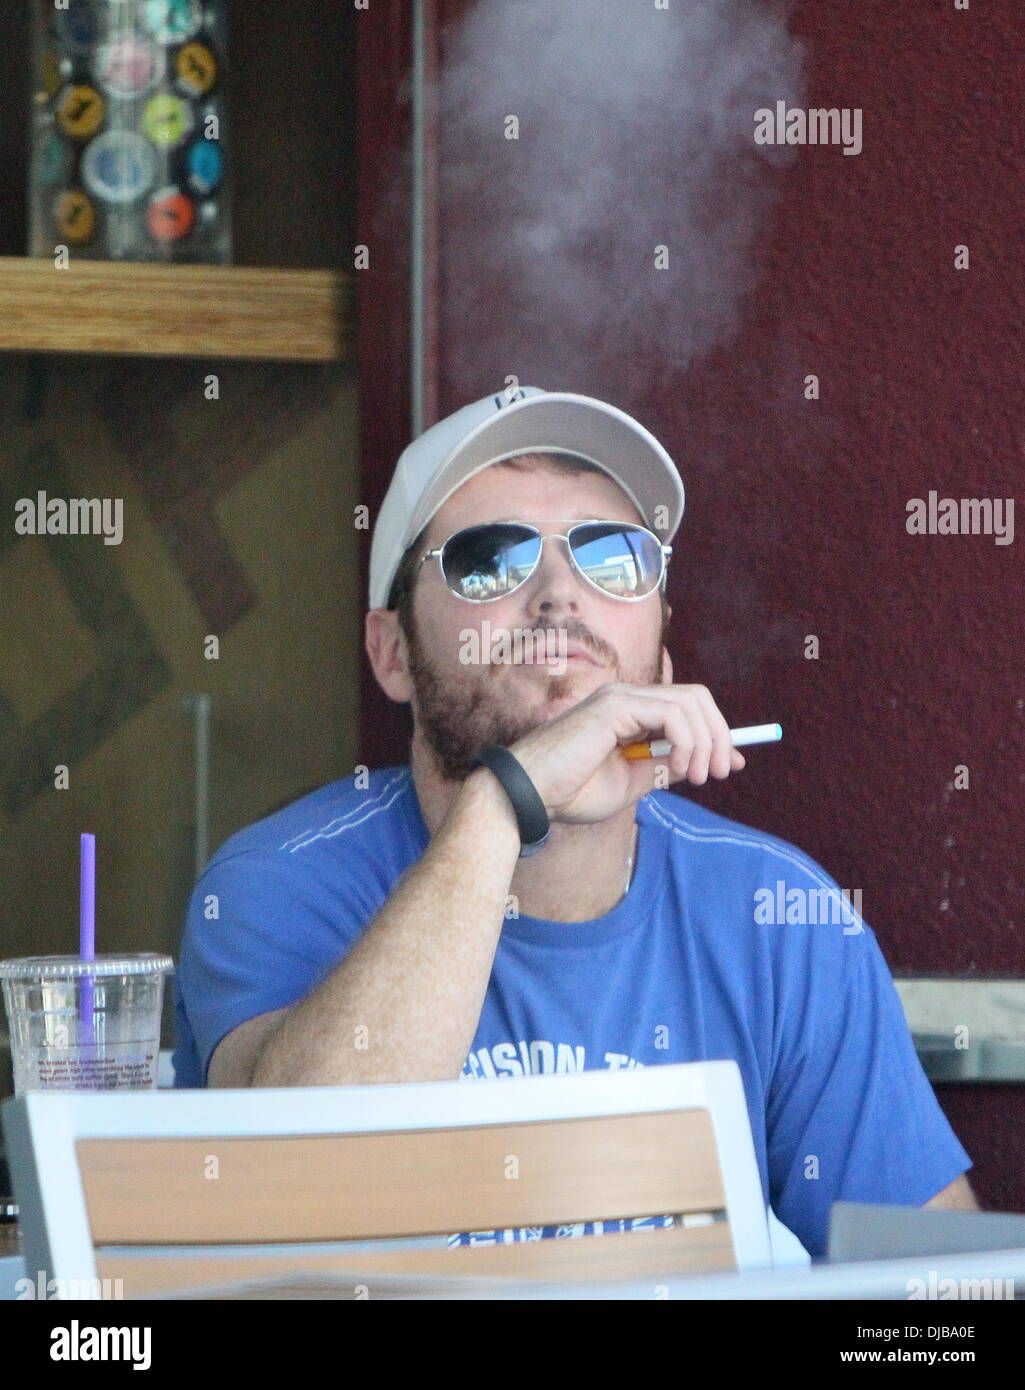 Kevin Connolly smoking a cigarette (or weed)
